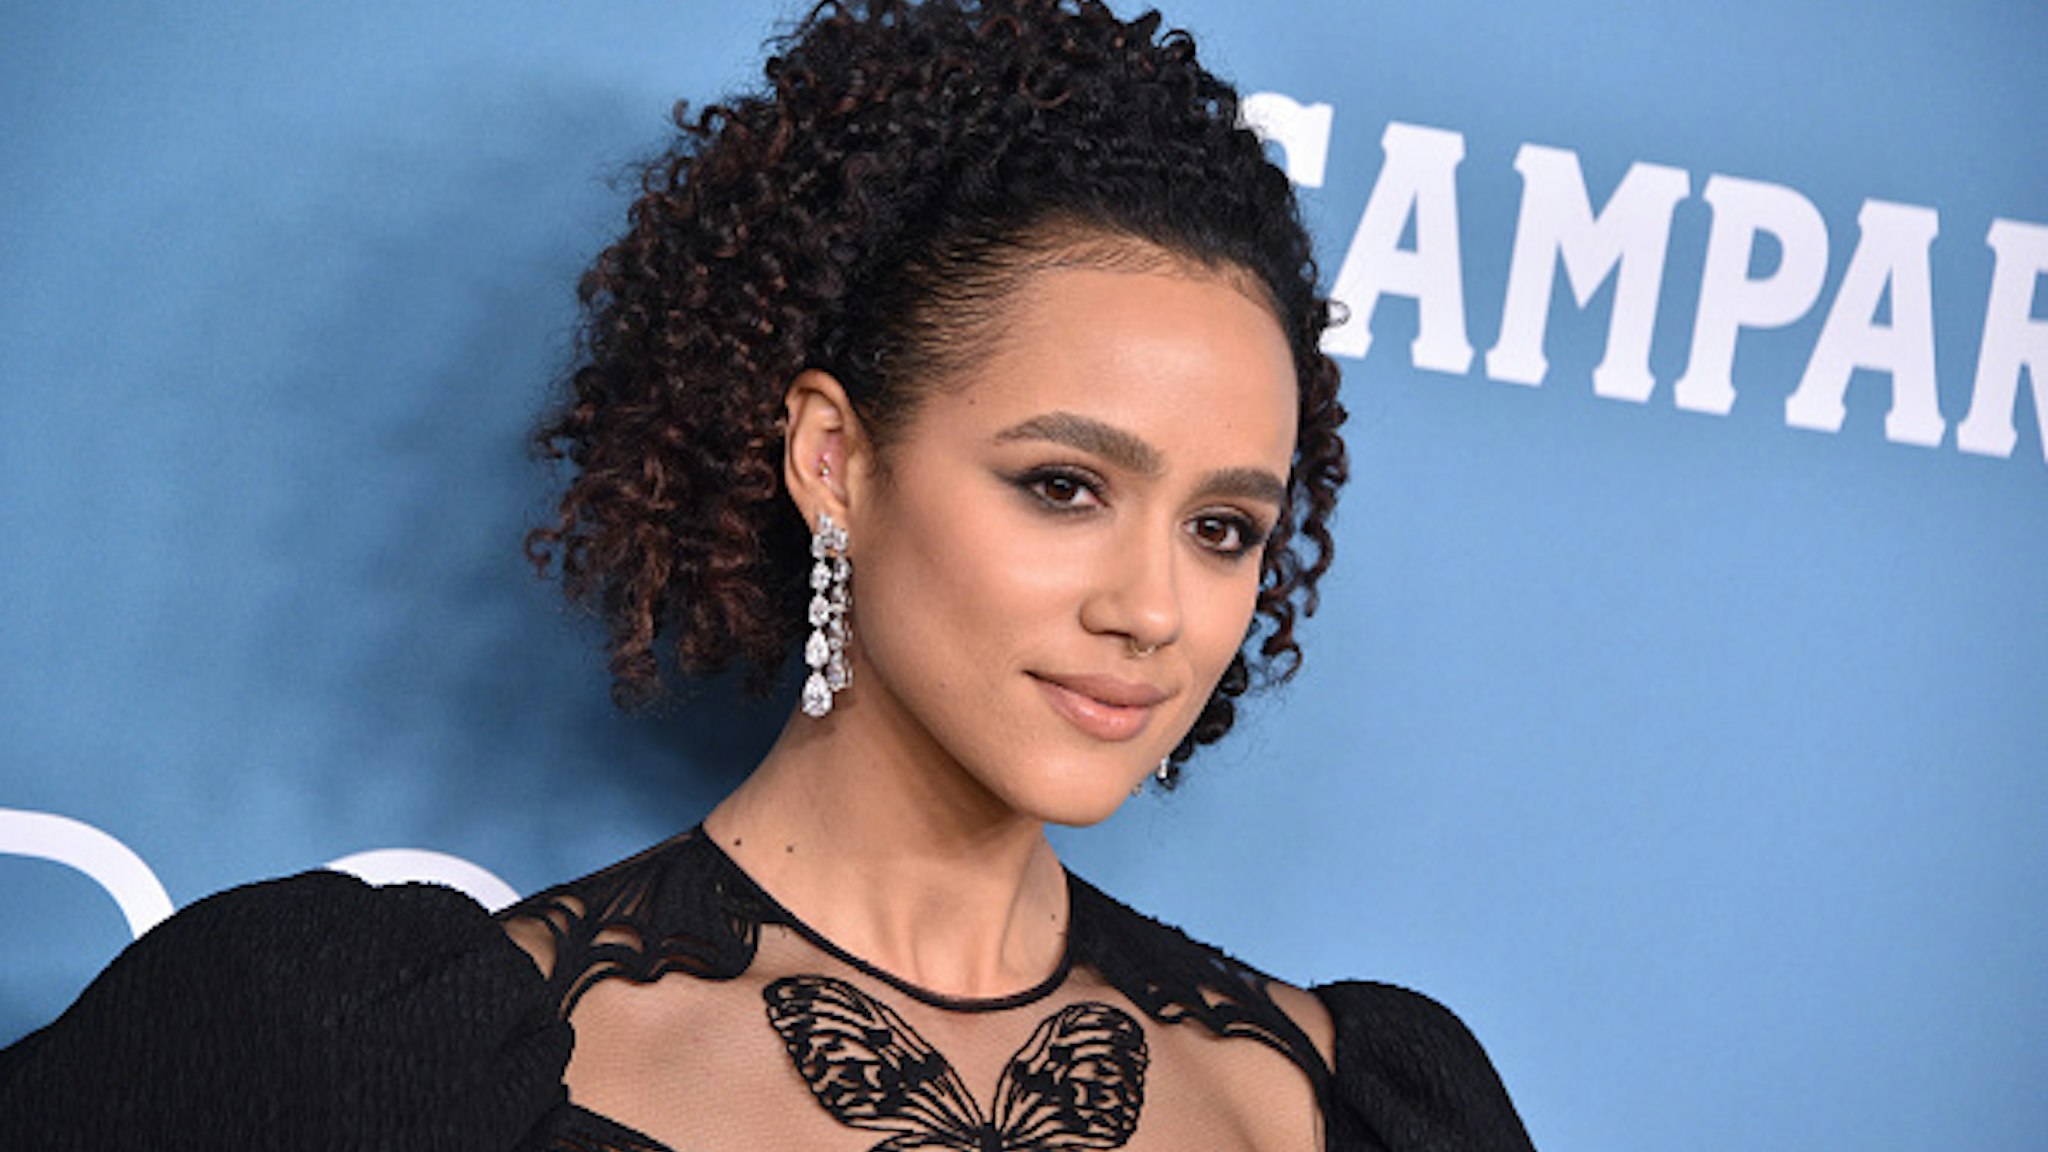 BEVERLY HILLS, CALIFORNIA - JANUARY 28: Nathalie Emmanuel attends the 22nd CDGA (Costume Designers Guild Awards) at The Beverly Hilton Hotel on January 28, 2020 in Beverly Hills, California.